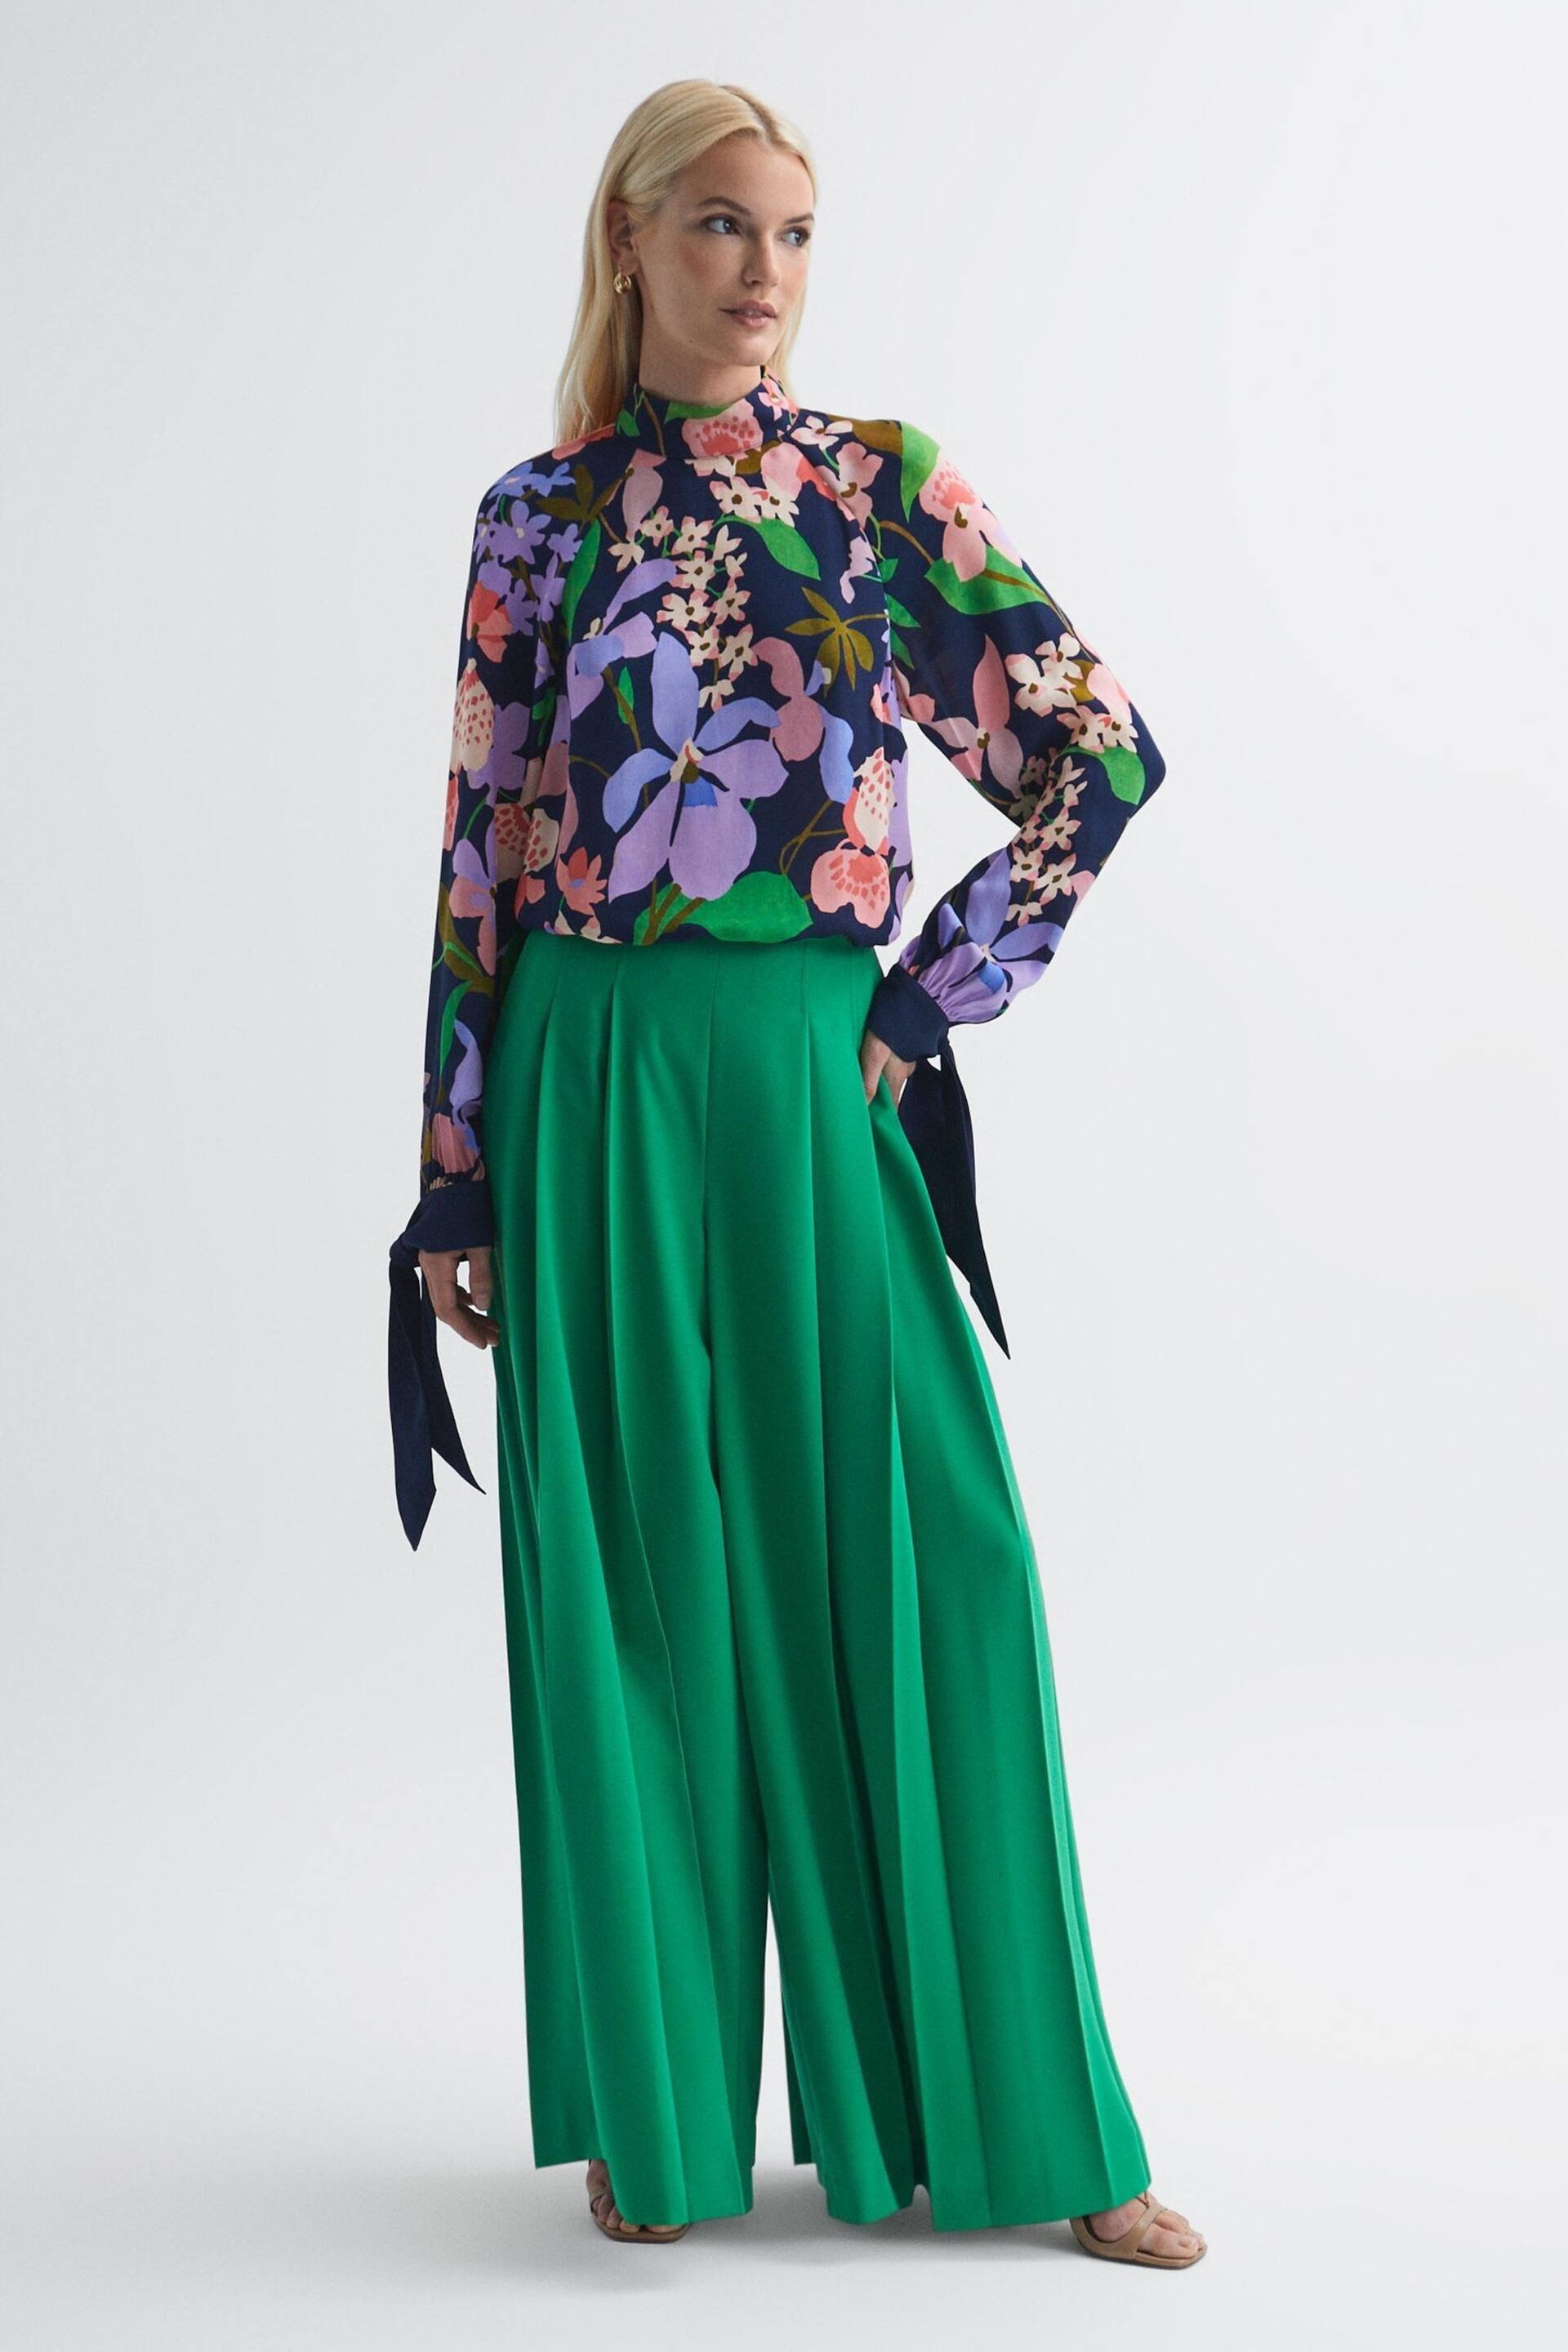 Florere Floral Long Sleeve Blouse - Image 1 of 5